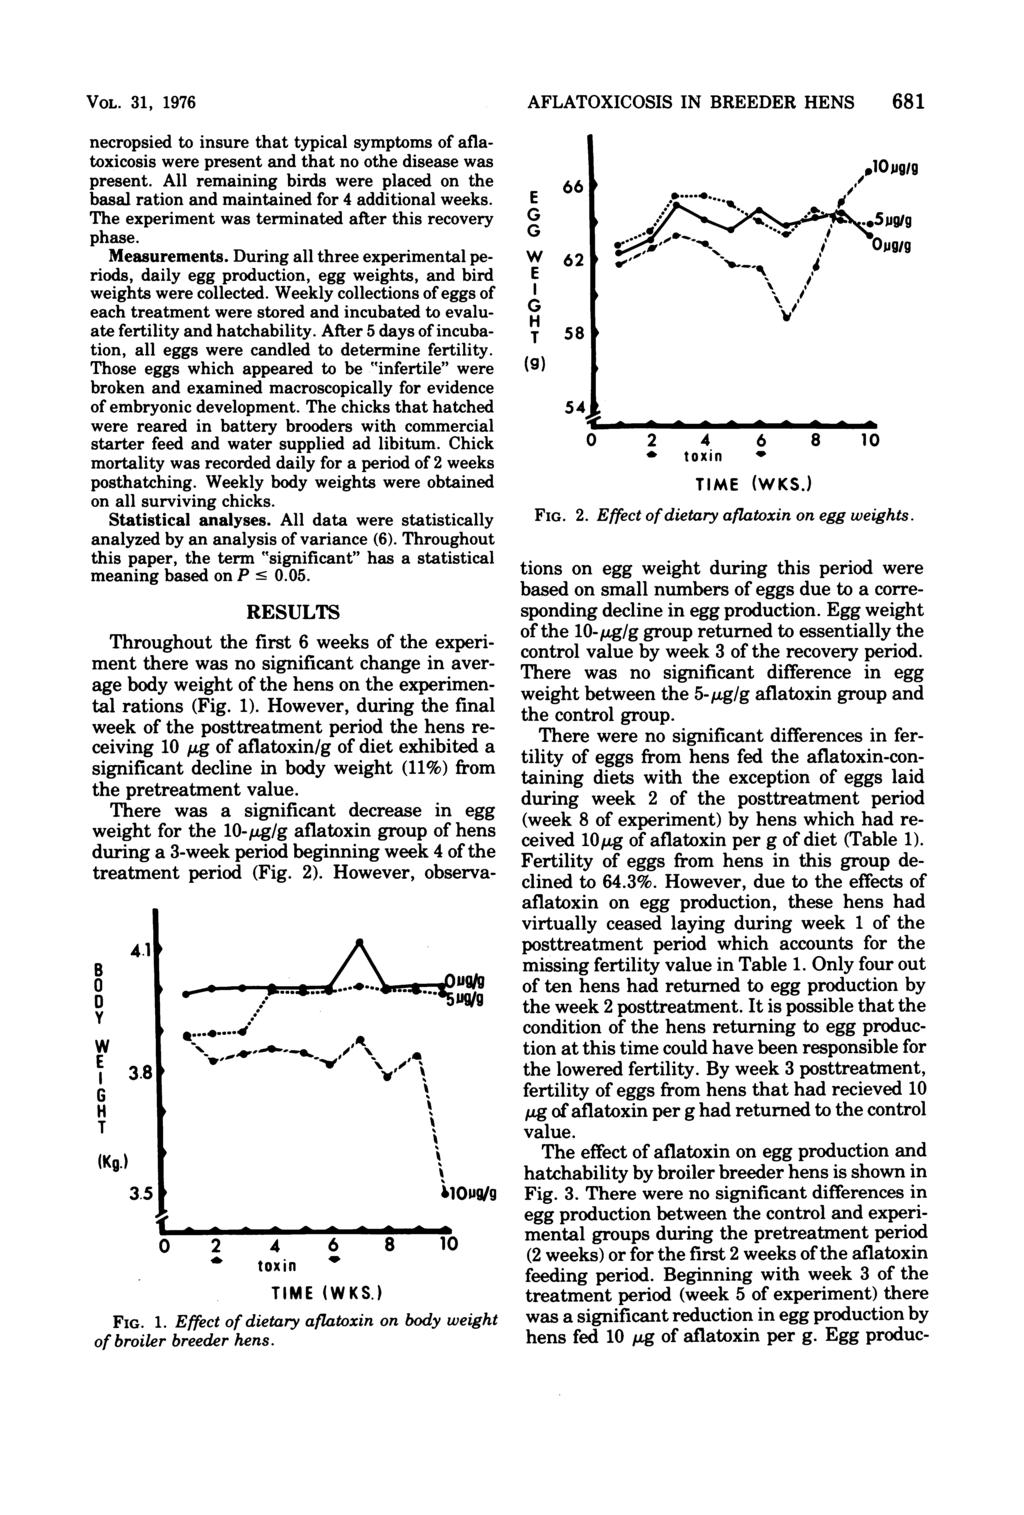 VOL. 31, 1976 necropsied to insure that typical symptoms of aflatoxicosis were present and that no othe disease was present.